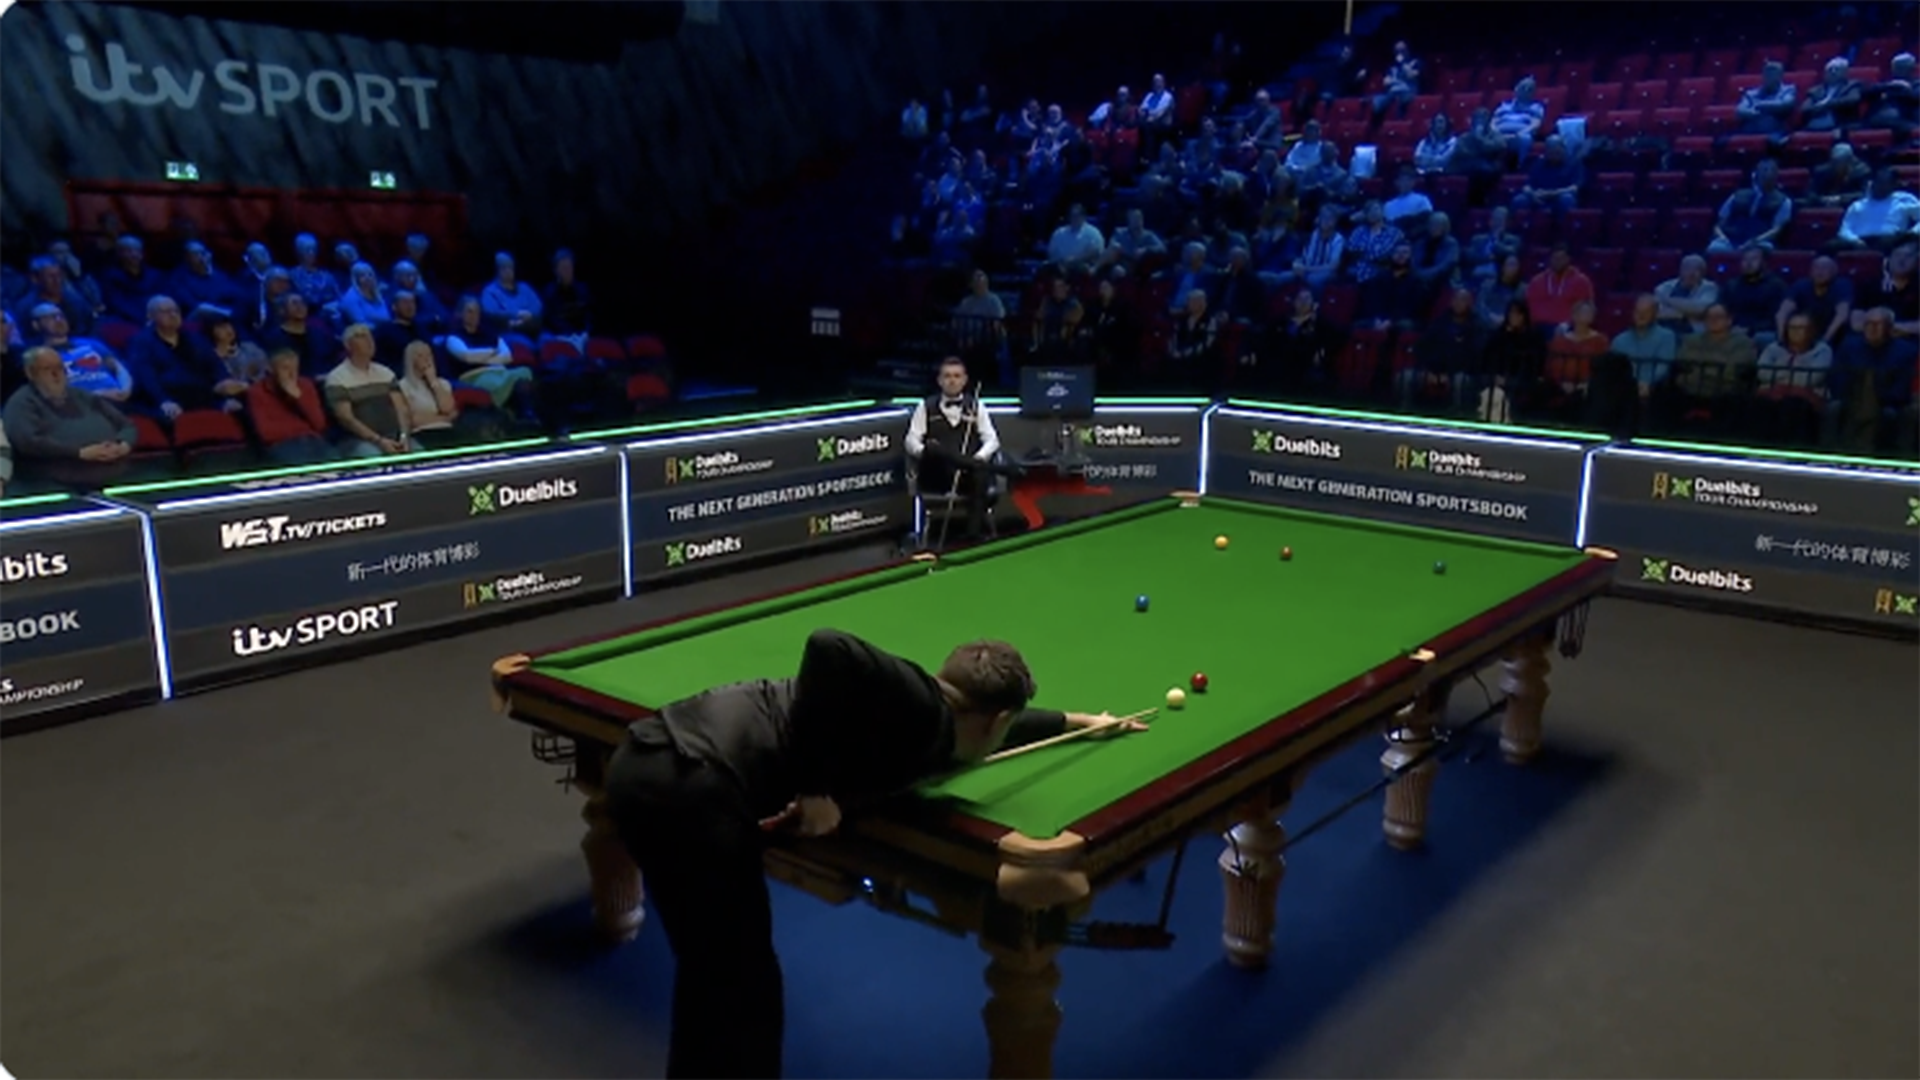 Snooker Watch Ryan Days incredible finish to the first 147 break in Tour Championship history